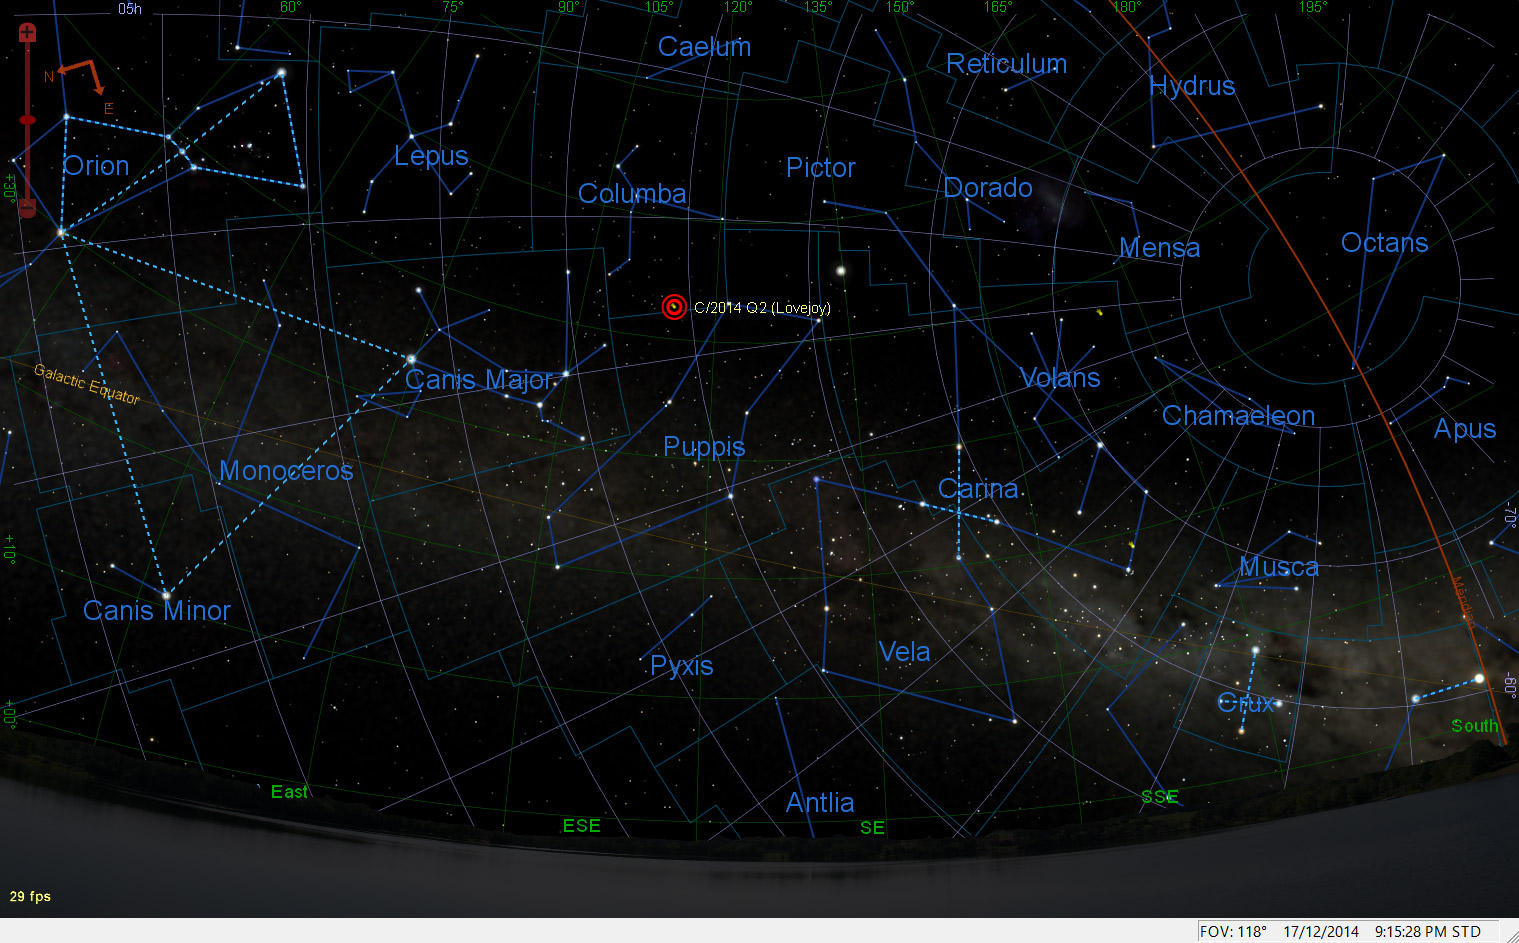 Comet C/2014 Q2 (Lovejoy) finder image to help find the come in the December night sky. The comet is nicely positioned in the south-east after sunset, between the bright stars Sirius and Canopus.